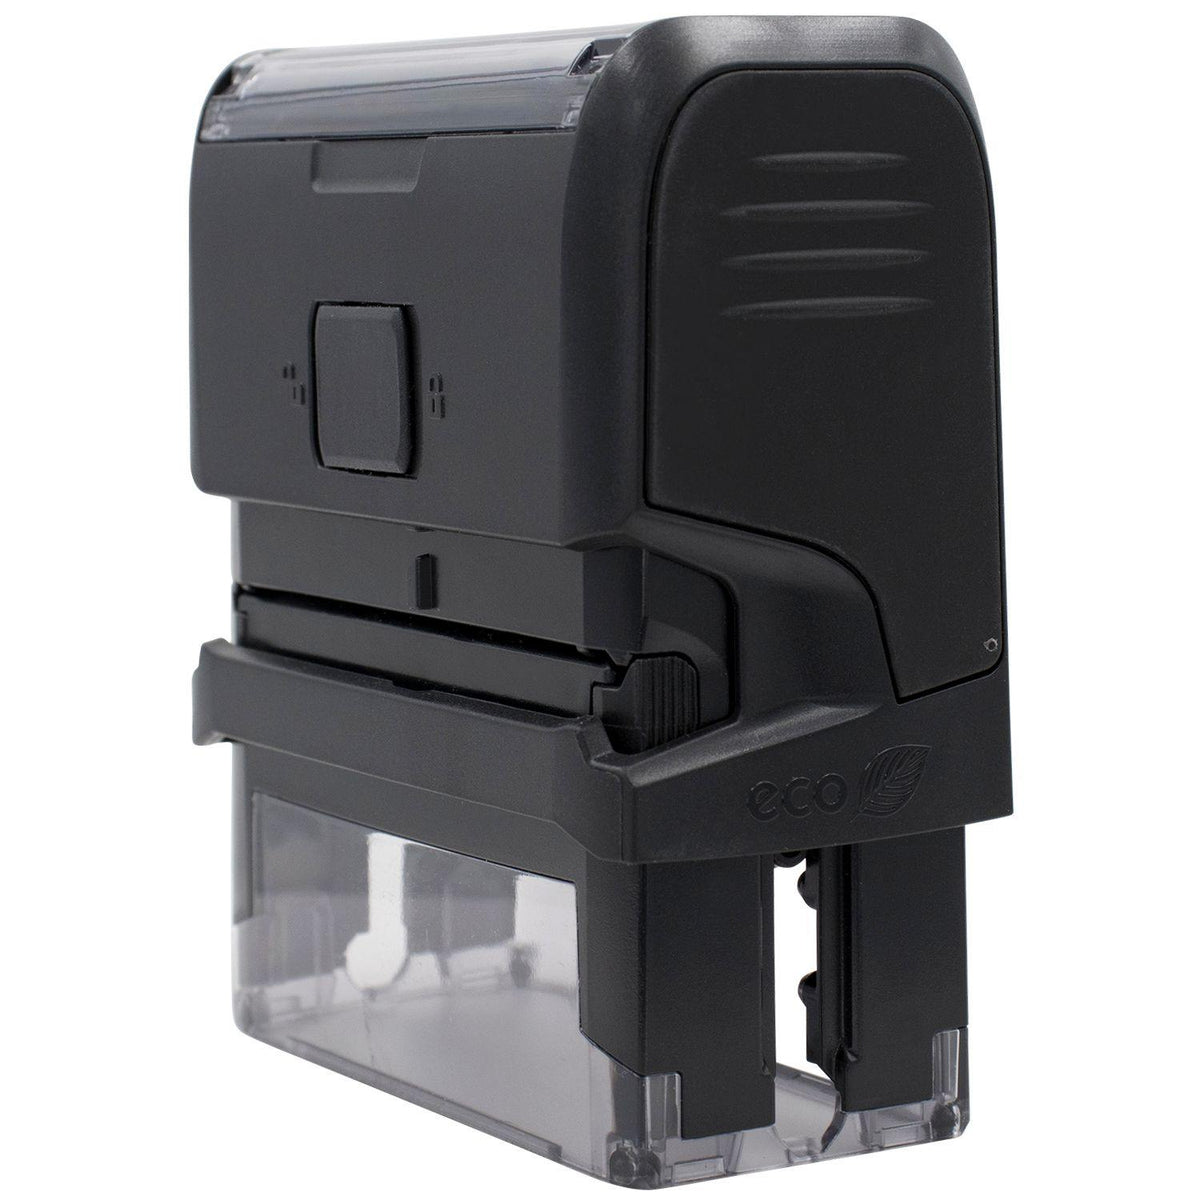 Side View of Large Self-Inking Brilliant Stamp at an Angle